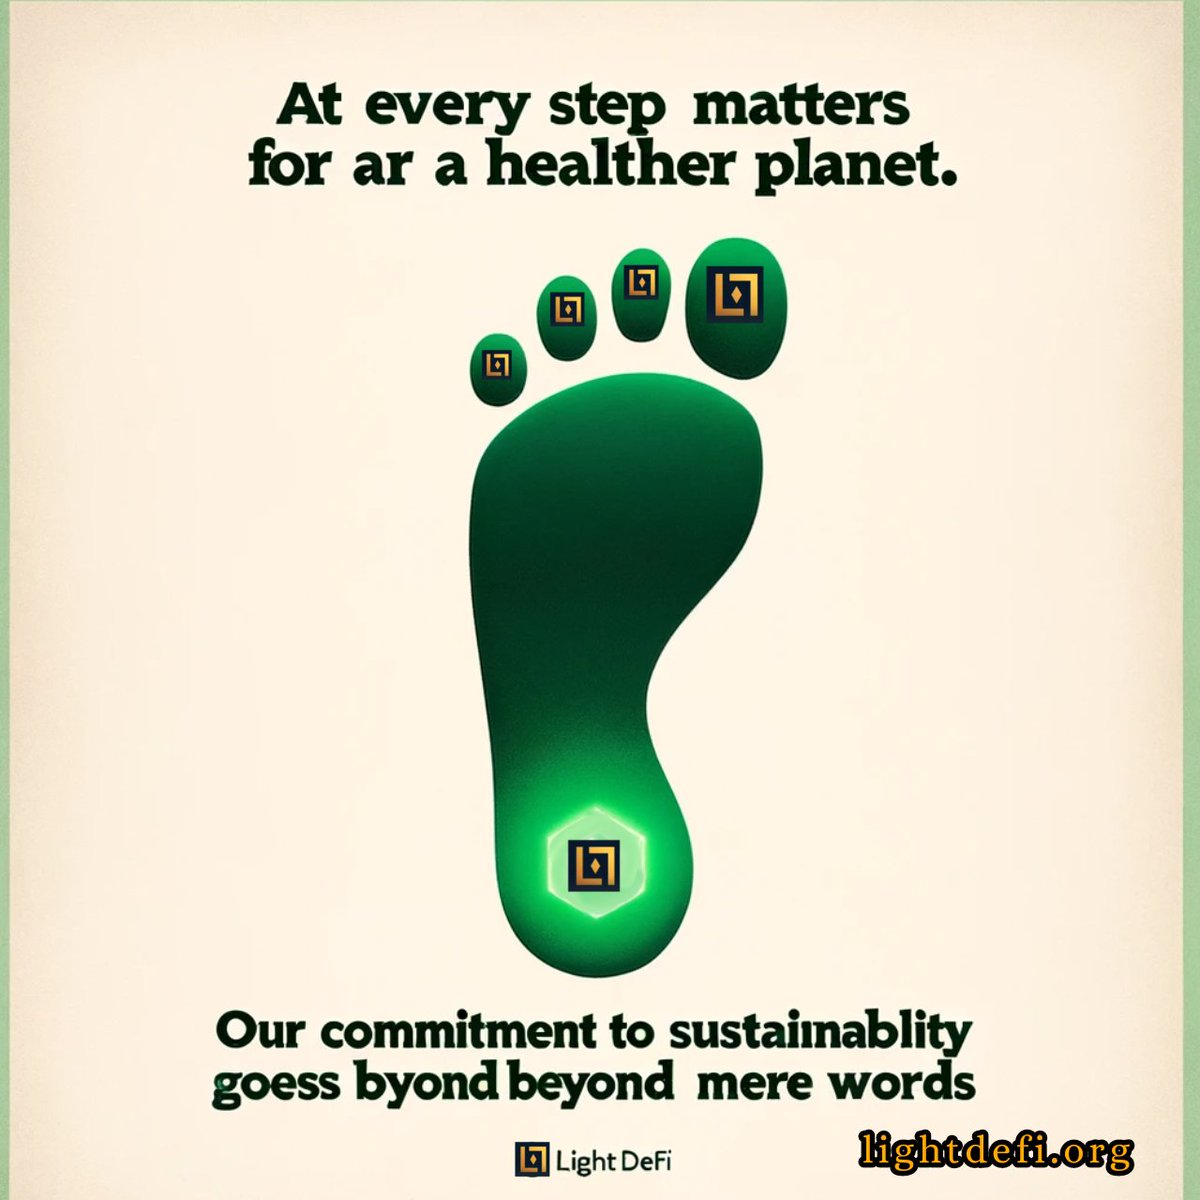 At Light DeFi, every step matters for a healthier planet. The commitment to sustainability goes beyond mere words. Via Láctea #EcoConsciousness #格付けチェック  #Sustainability #LightDeFi #ホロお正月CUP2024 #TGAT #JungKook  #แอมมี่
#BerNoDanca